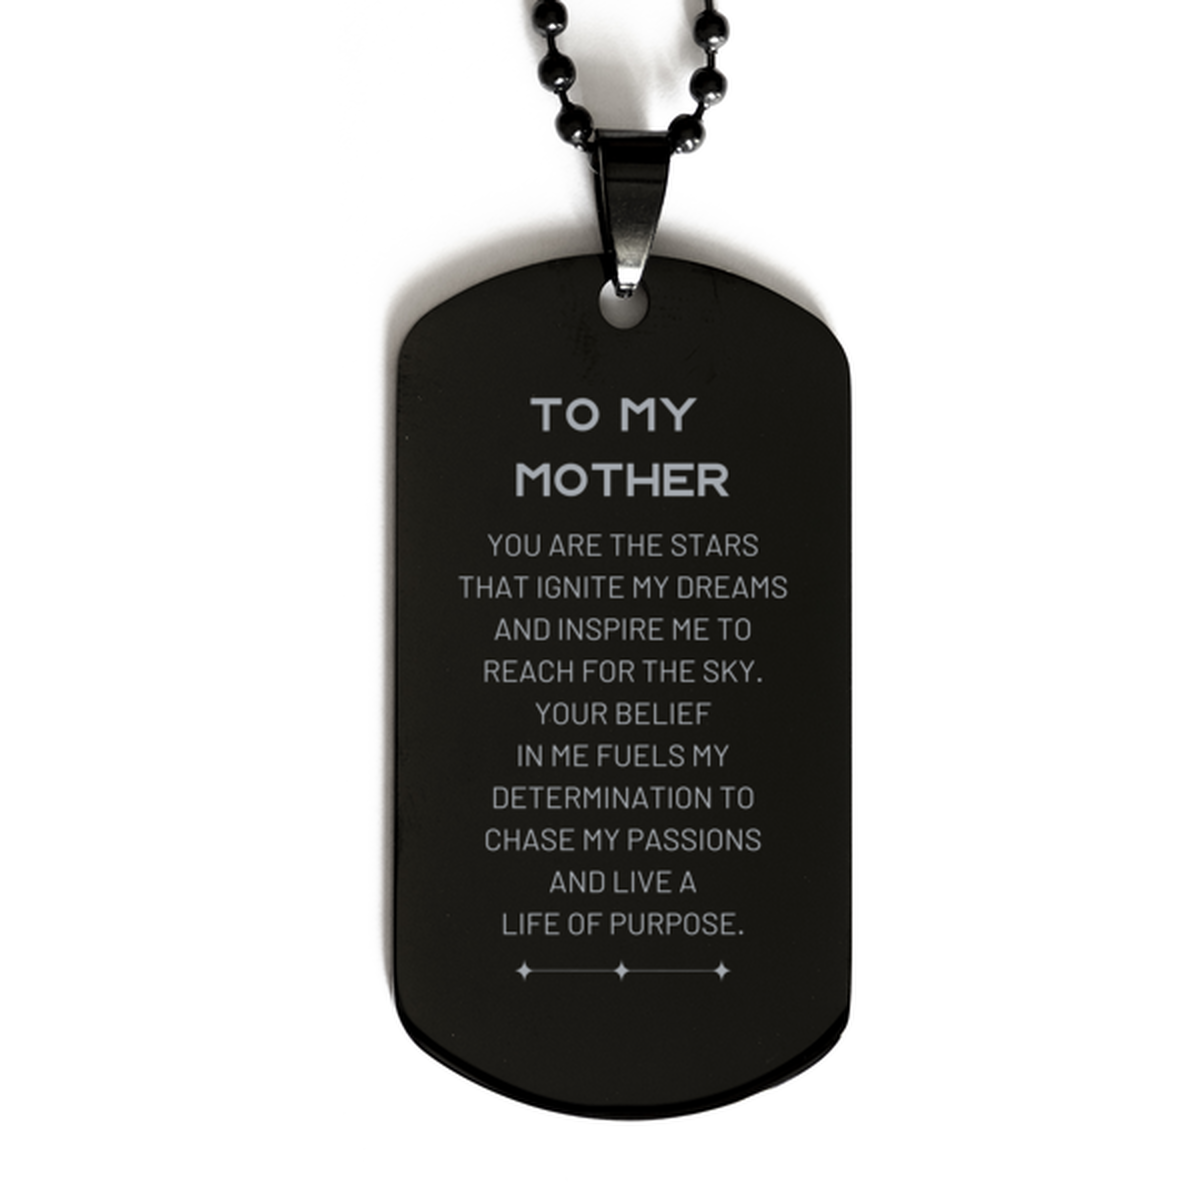 To My Mother Black Dog Tag, You are the stars that ignite my dreams and inspire me to reach for the sky, Birthday Unique Gifts For Mother, Thank You Gifts For Mother